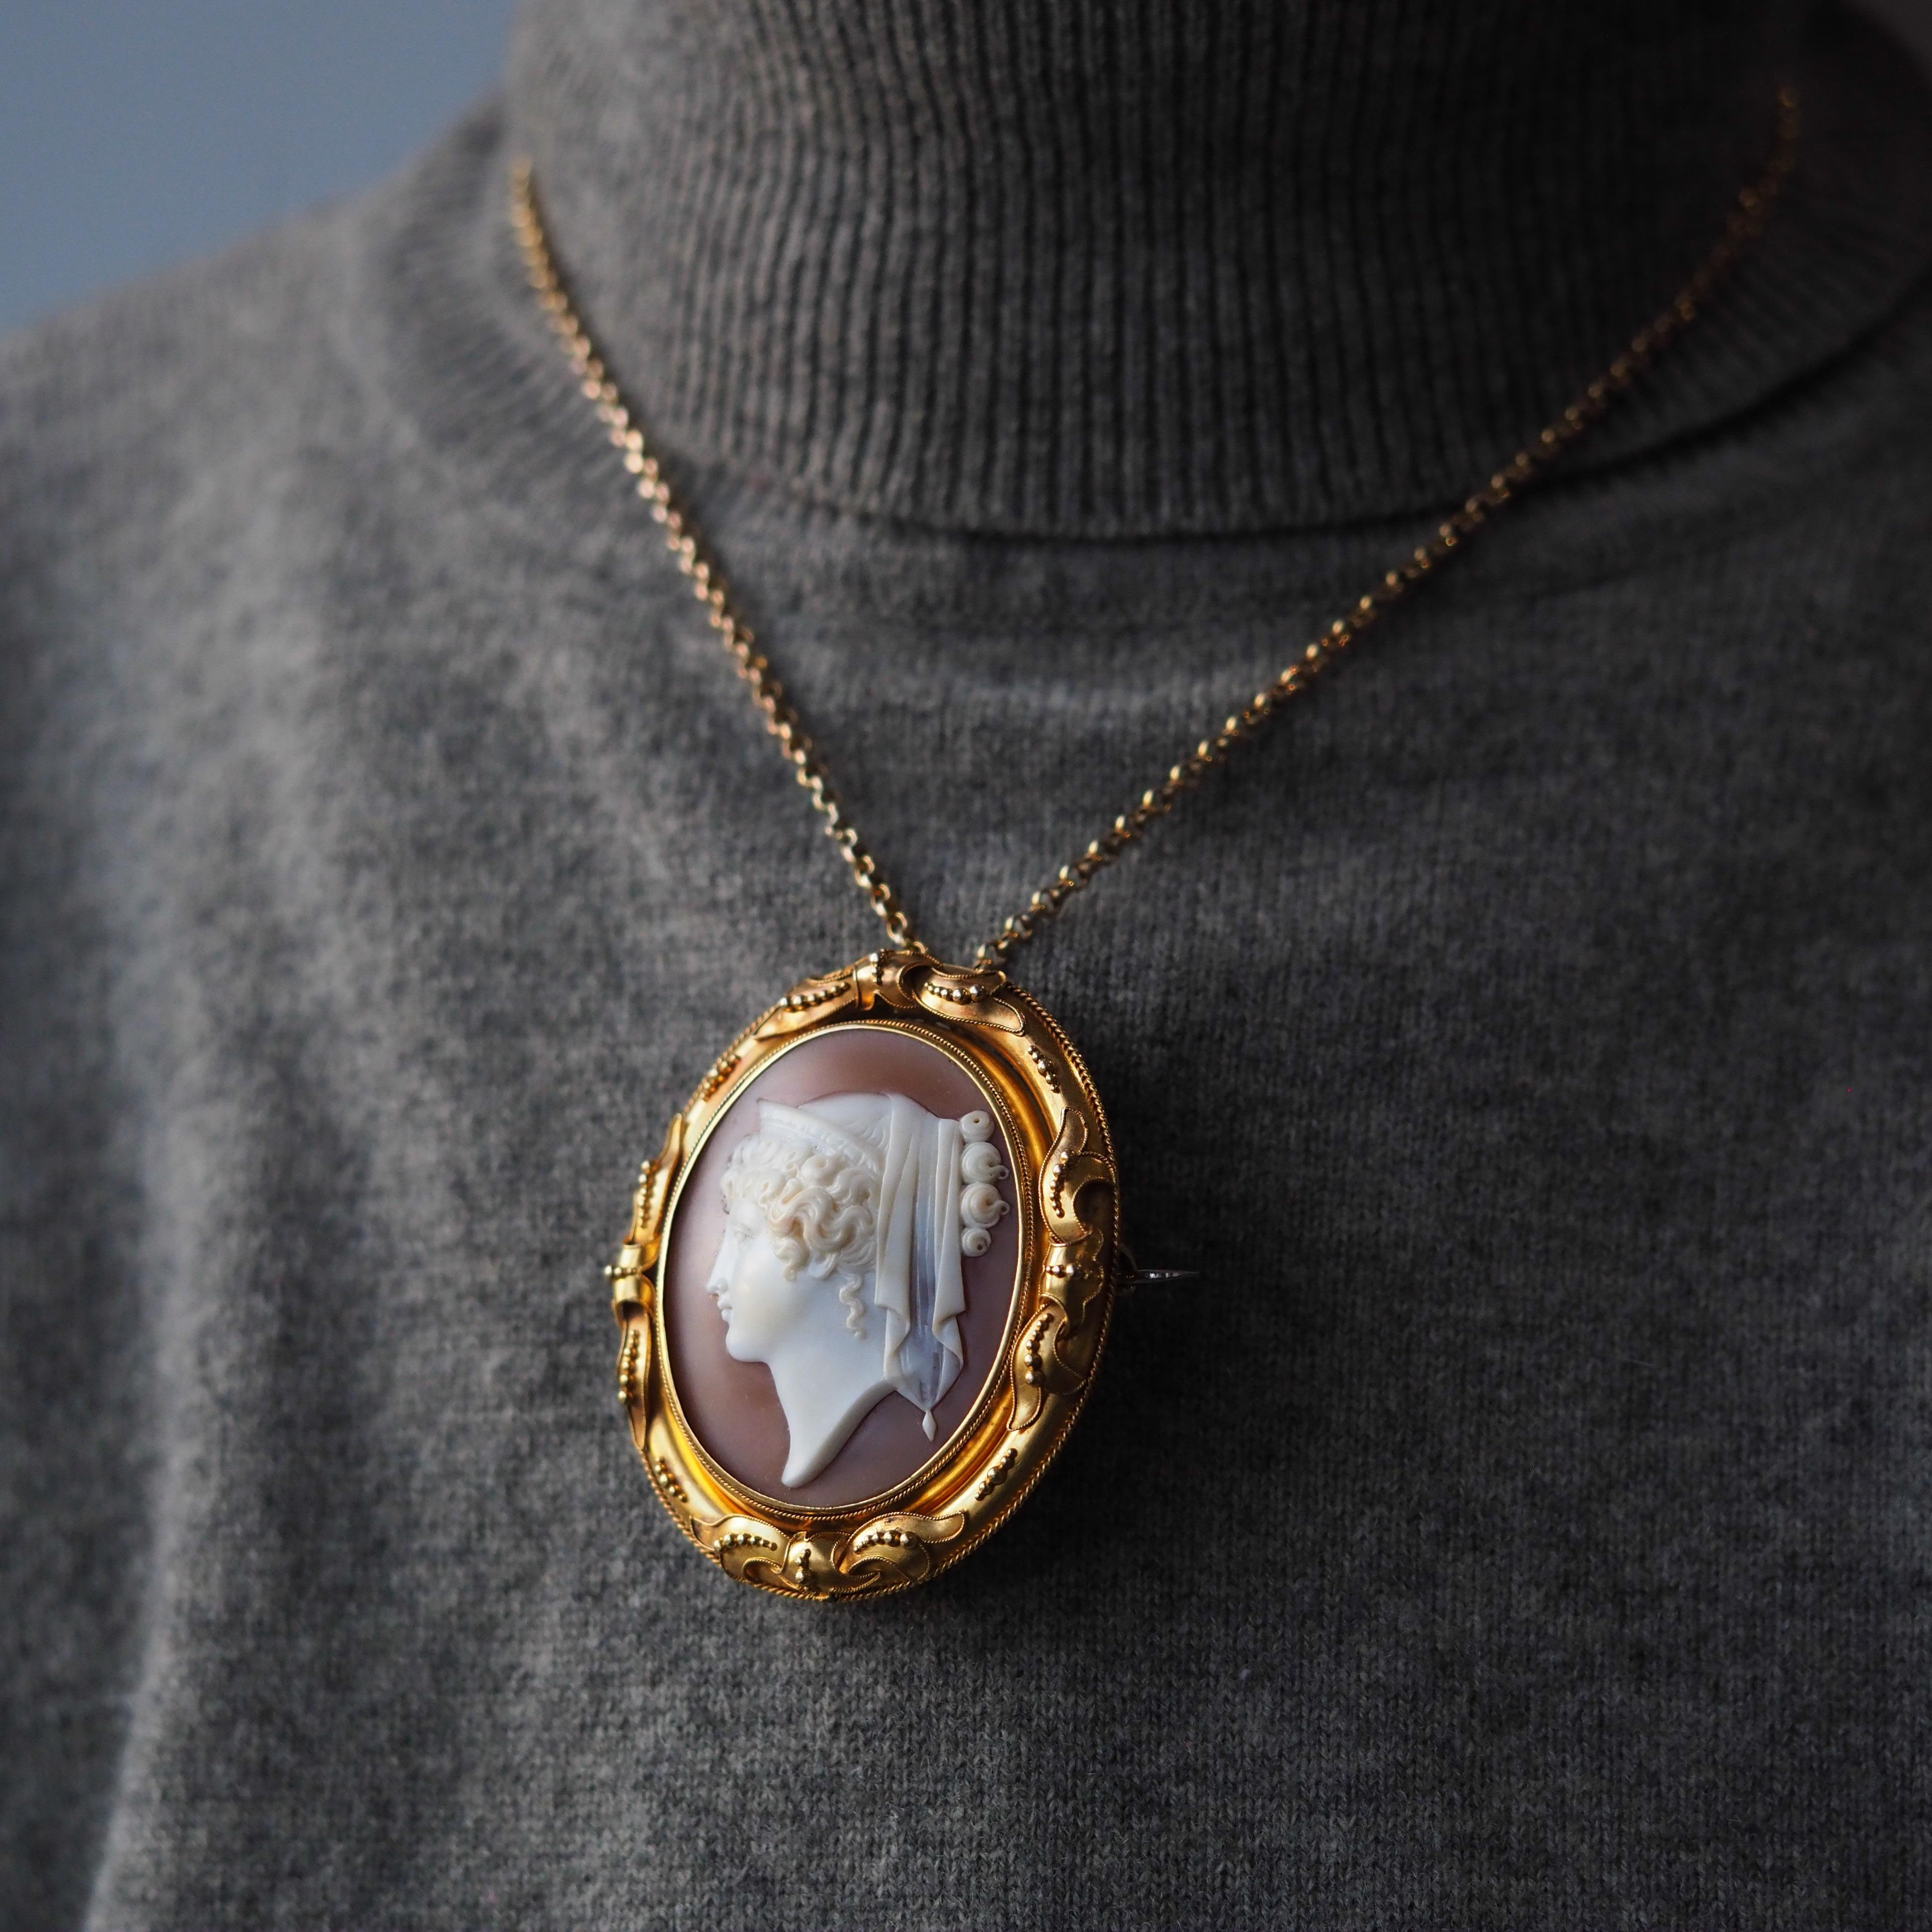 Antique Cameo Brooch Pendant Necklace 18K Gold - Victorian c.1860 For Sale 15